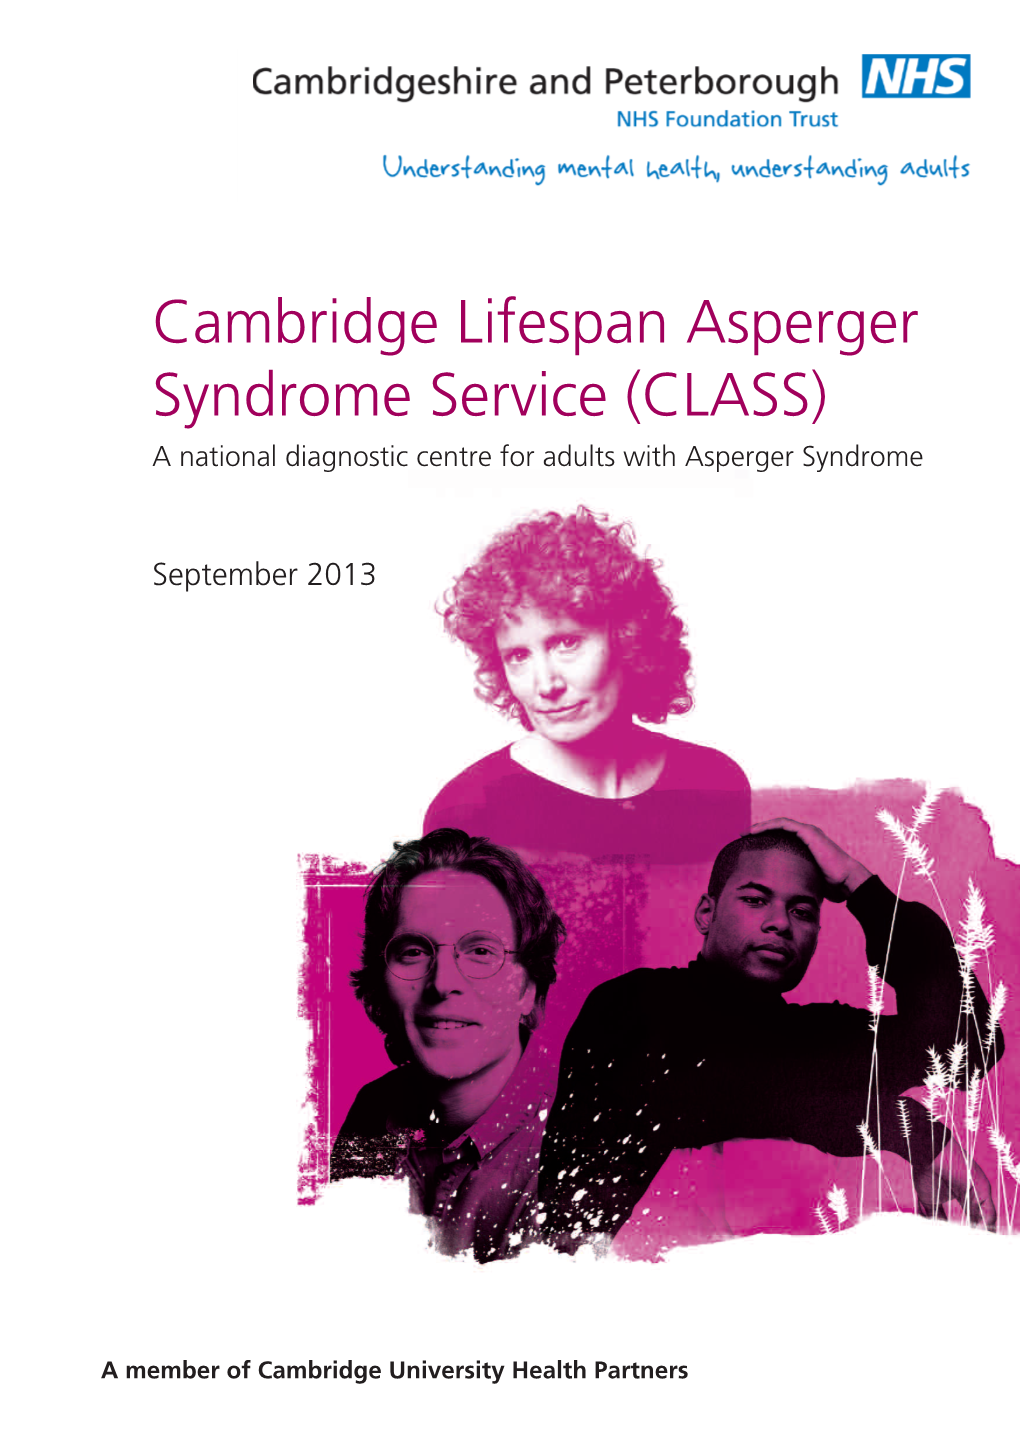 Cambridge Lifespan Asperger Syndrome Service (CLASS) a National Diagnostic Centre for Adults with Asperger Syndrome